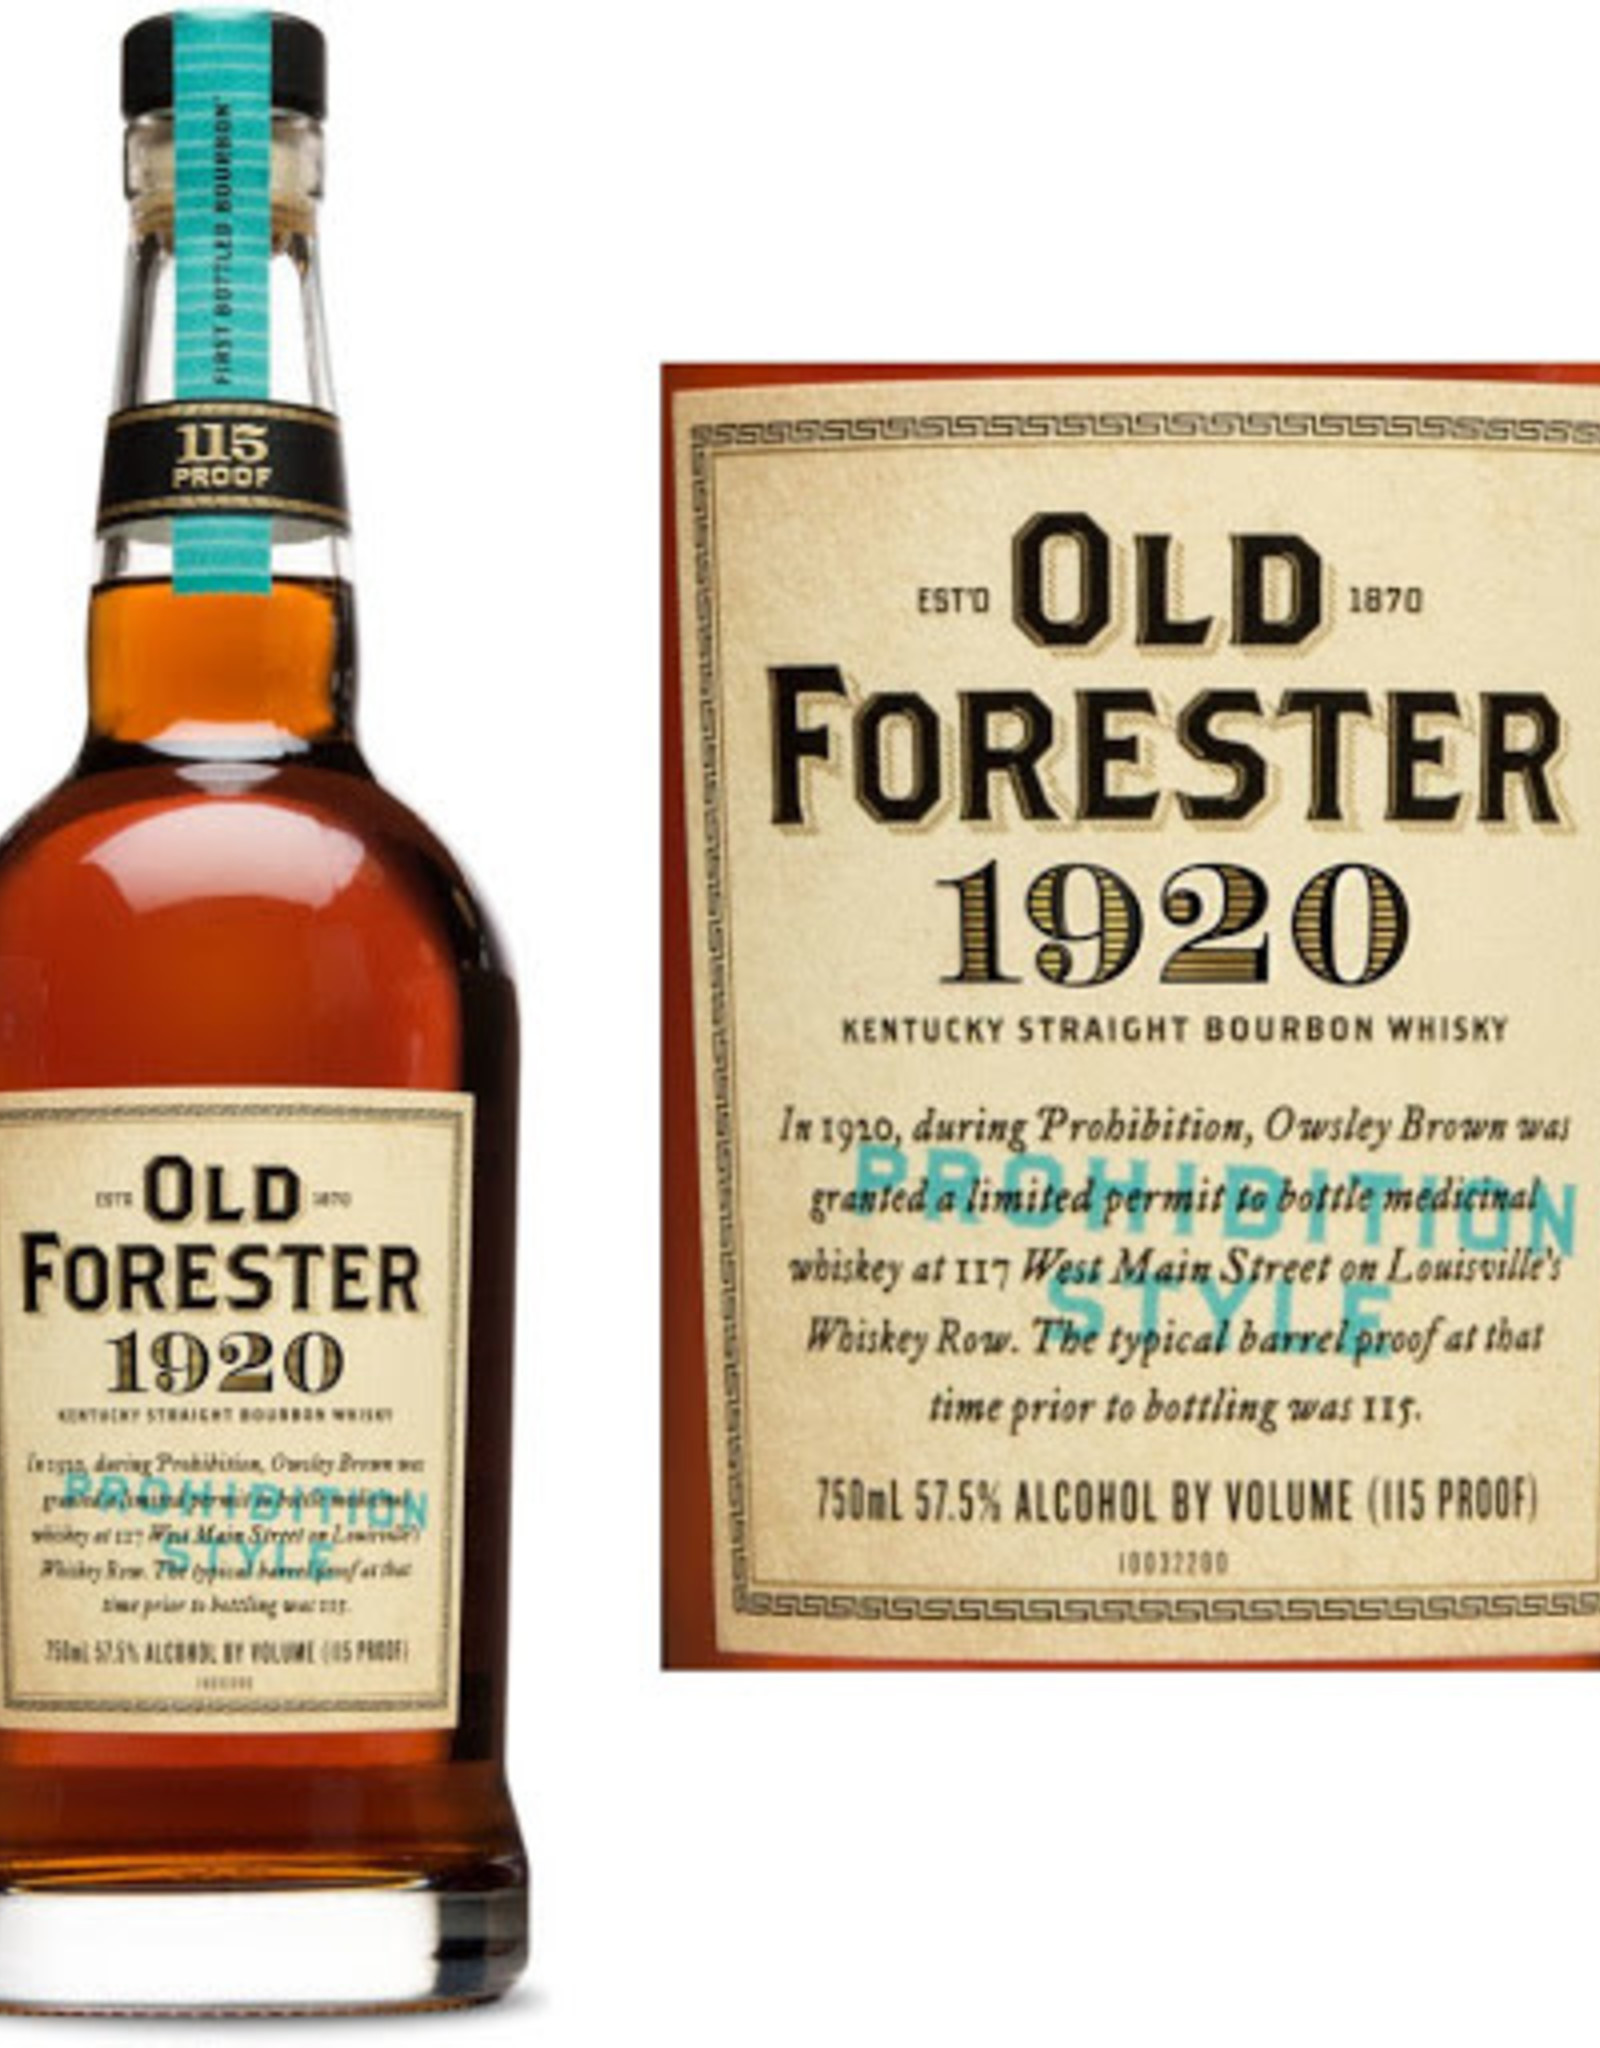 Old Forster Old Forester 1920 Prohidition Style 750 ml